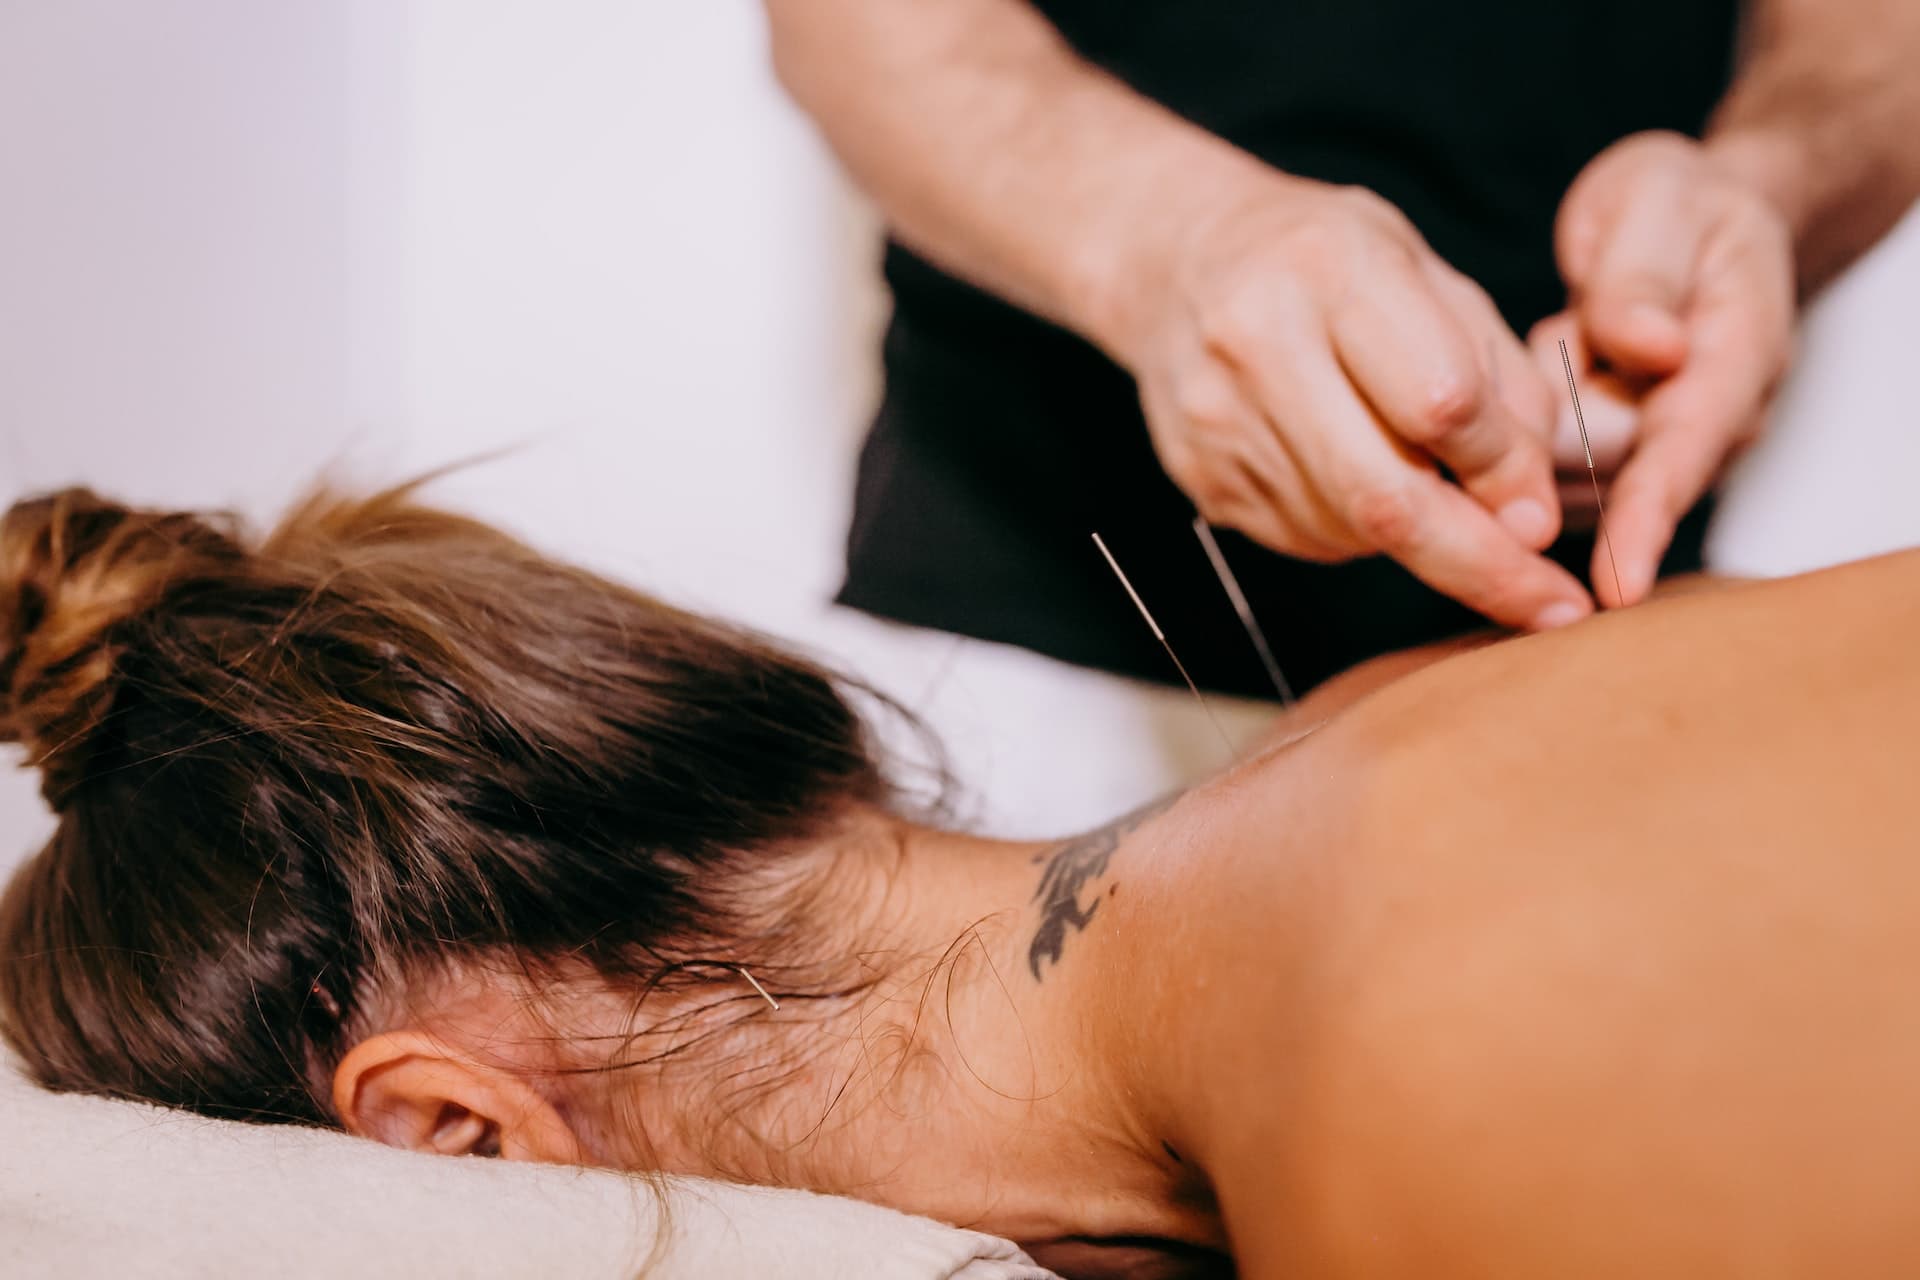 A woman who gets acupuncture treatment.